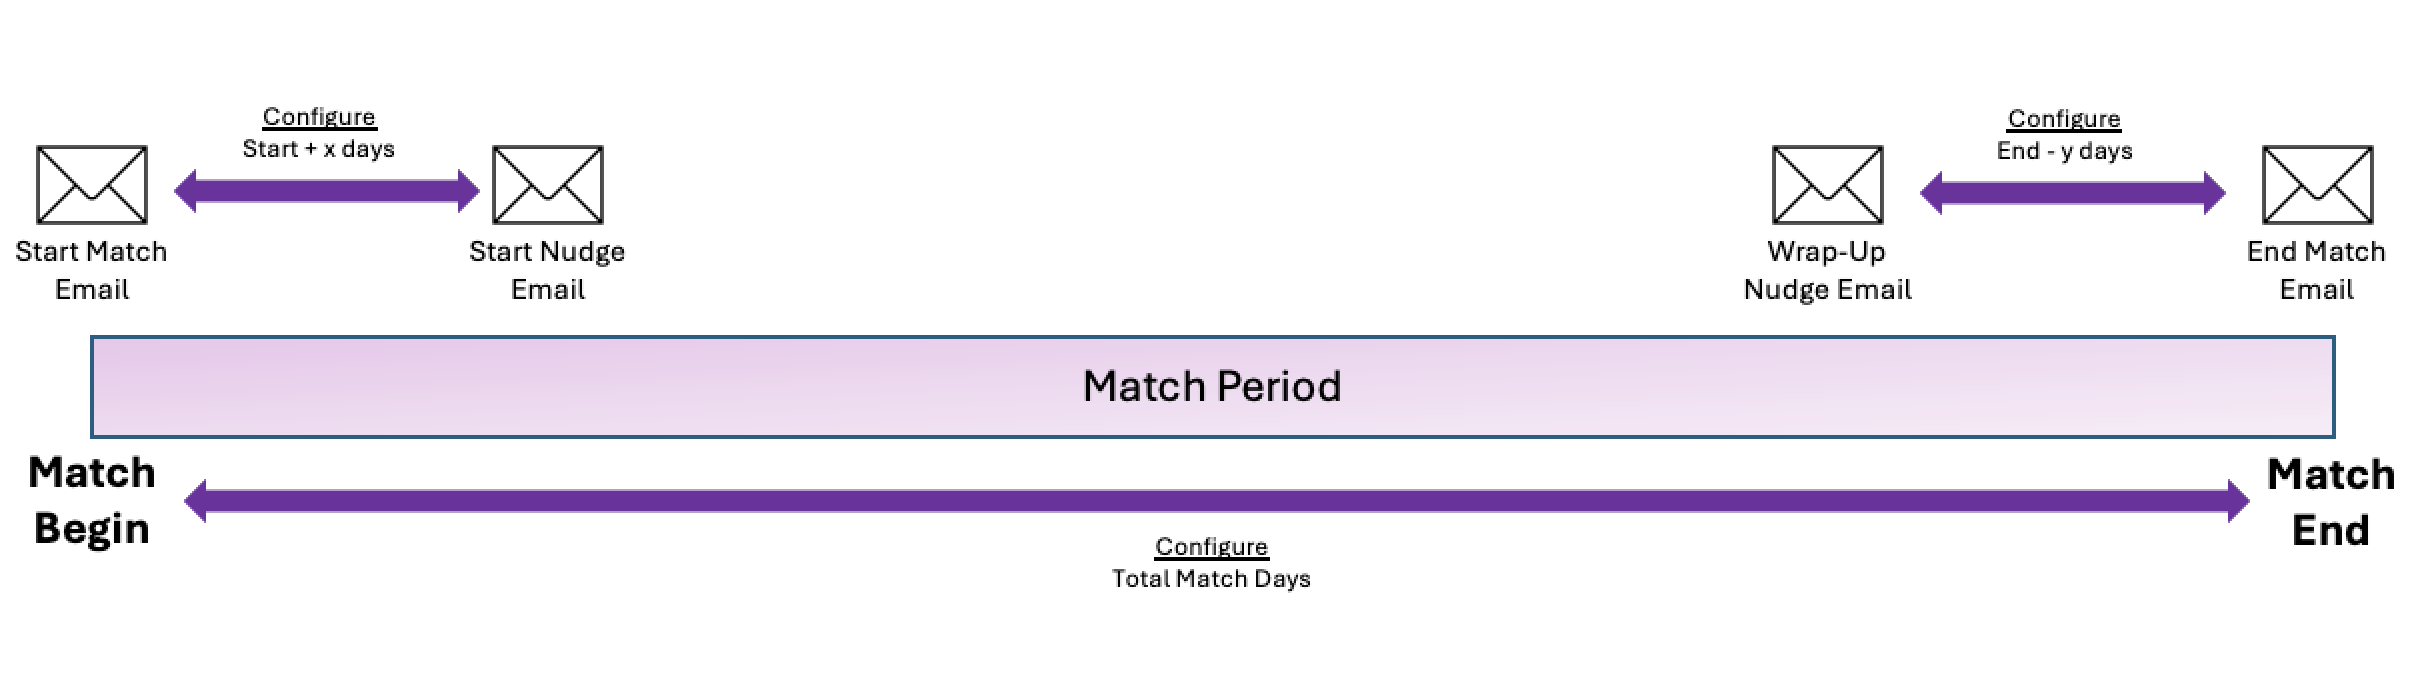 Graphic illustrating a timeline of Buddy-Onboarder matching and email timing.